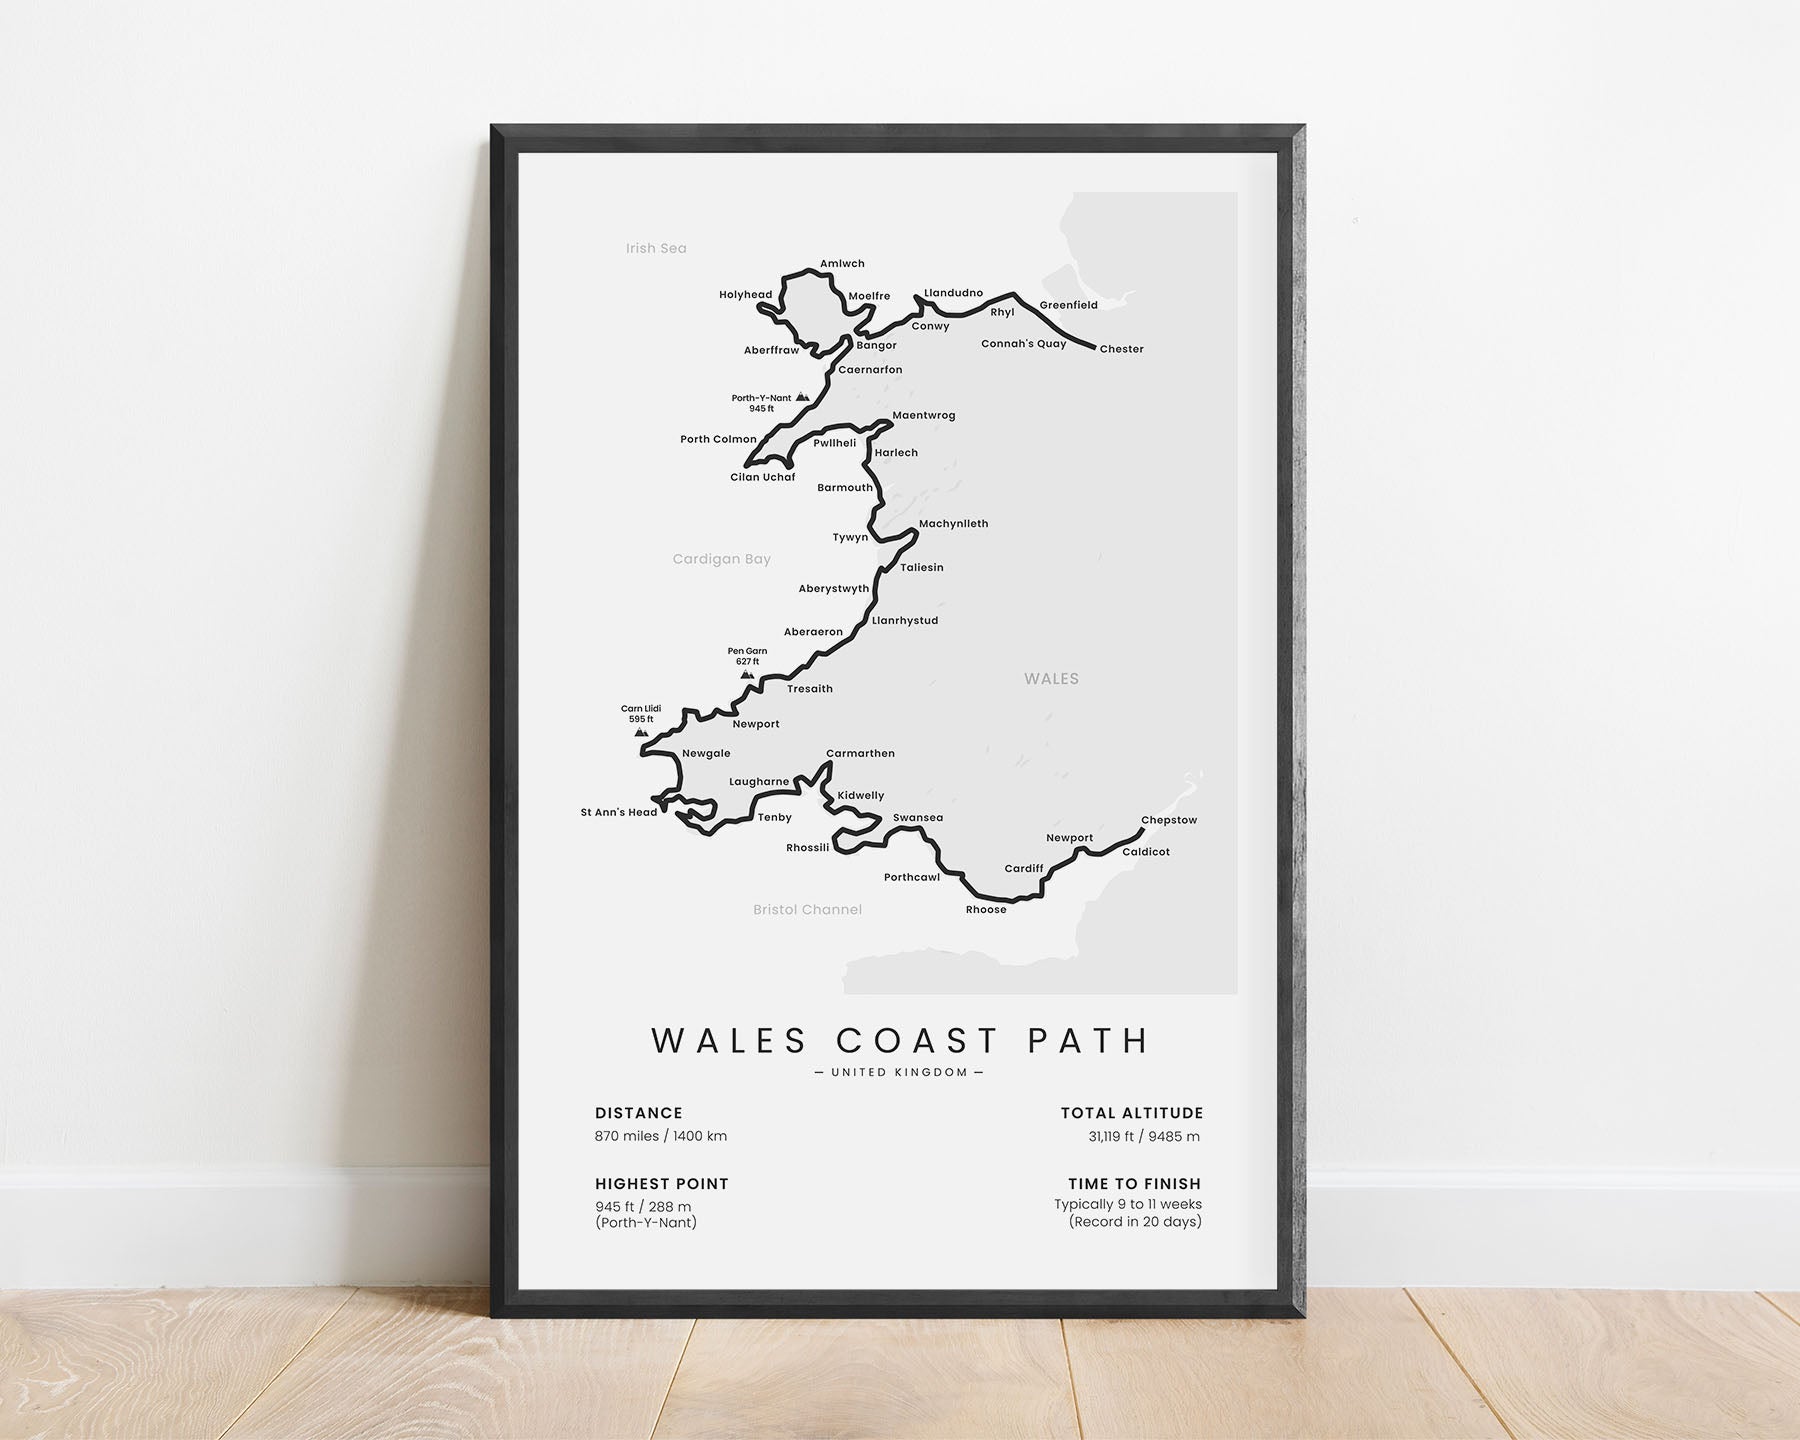 Wales Coast Path (Chester to Chepstow) route wall map with white background